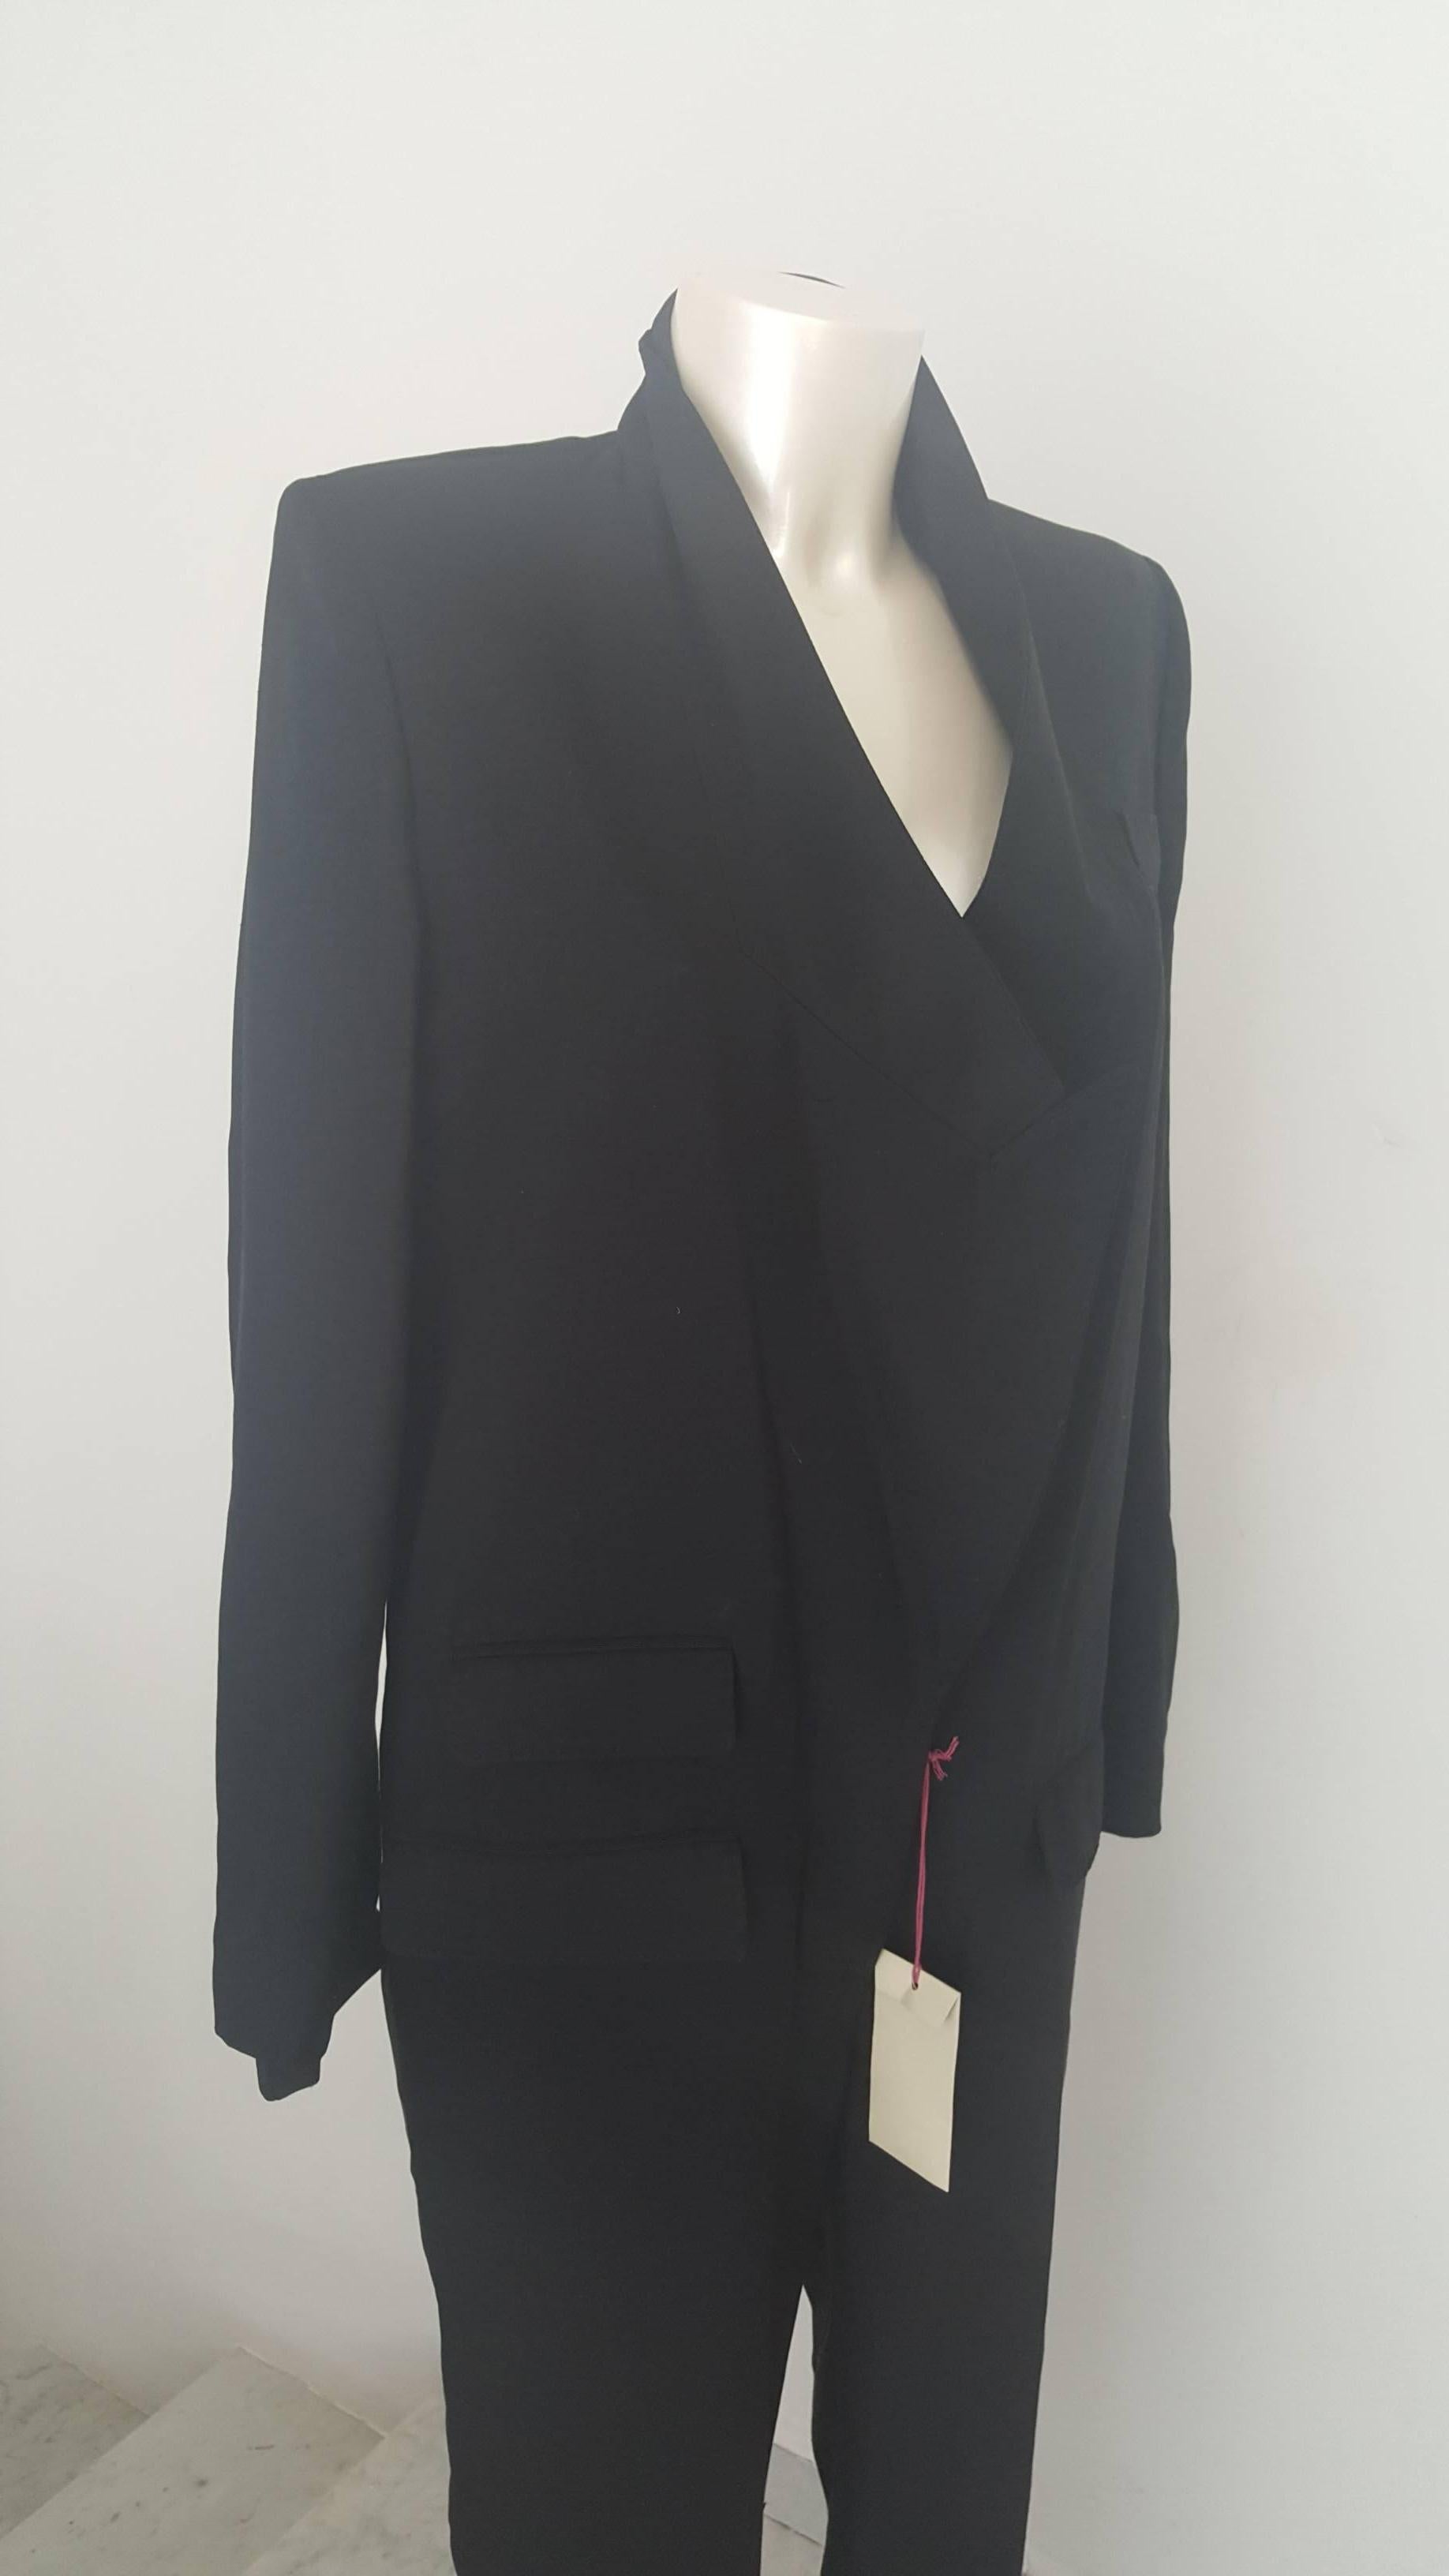 2000s Stella McCartney black jumpsuit - all in one
still with tags. 
